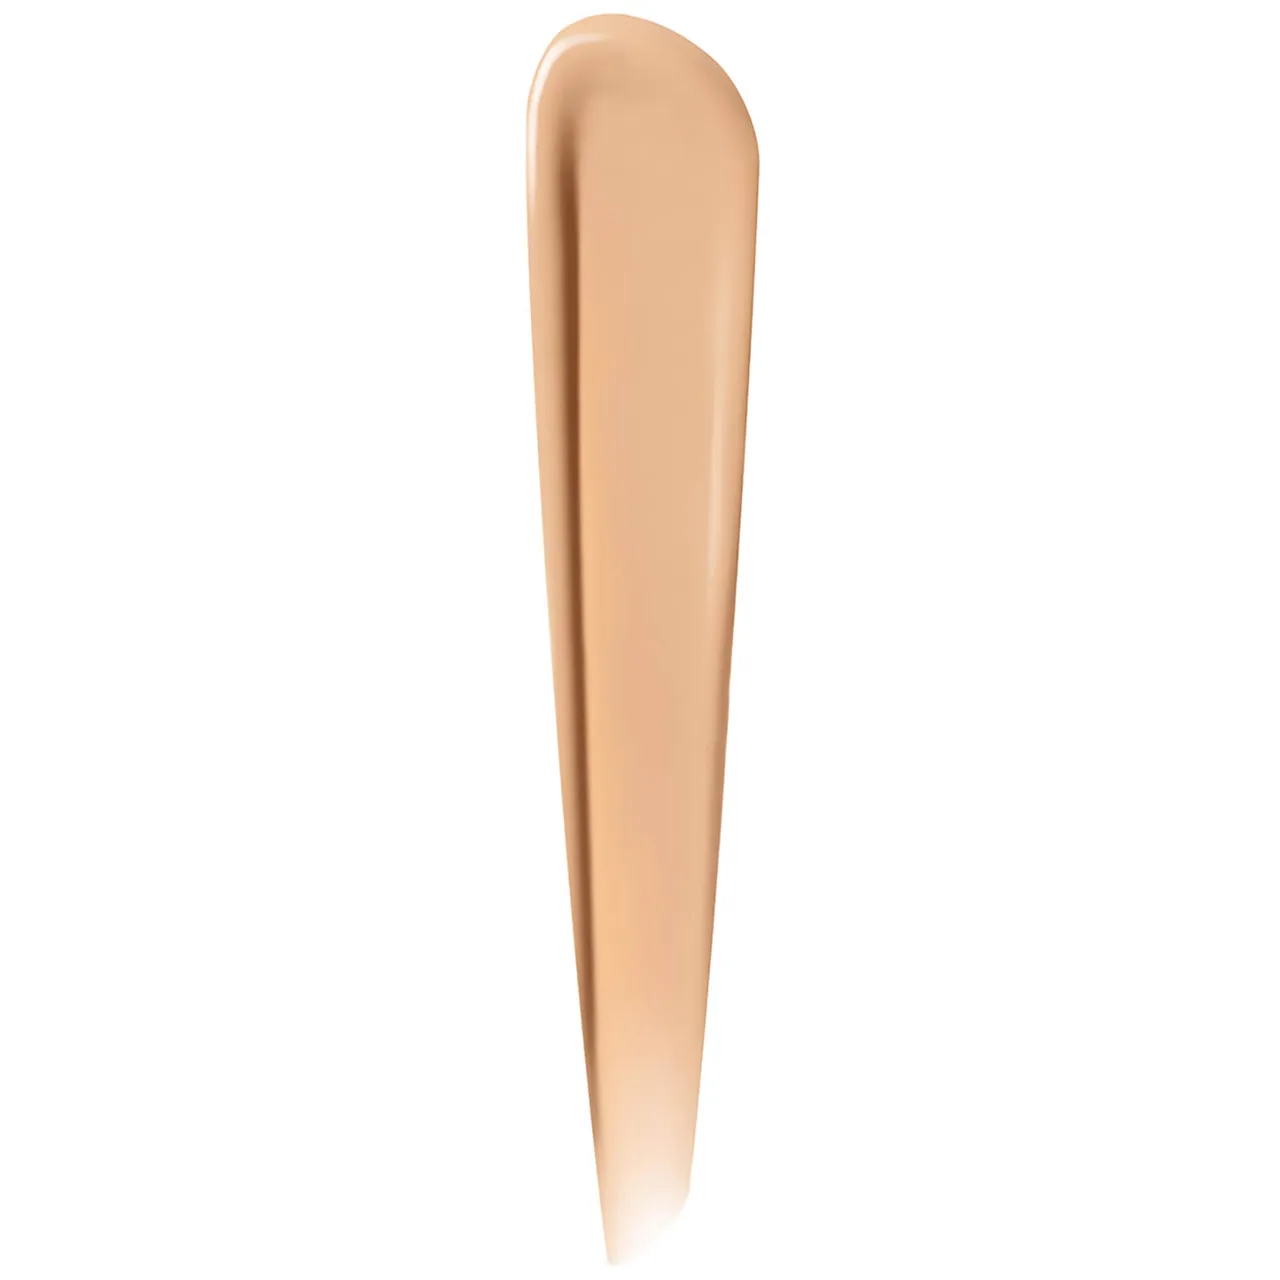 Clinique Even Better All-Over Concealer and Eraser 6ml (Various Shades) - CN 52 Neutral